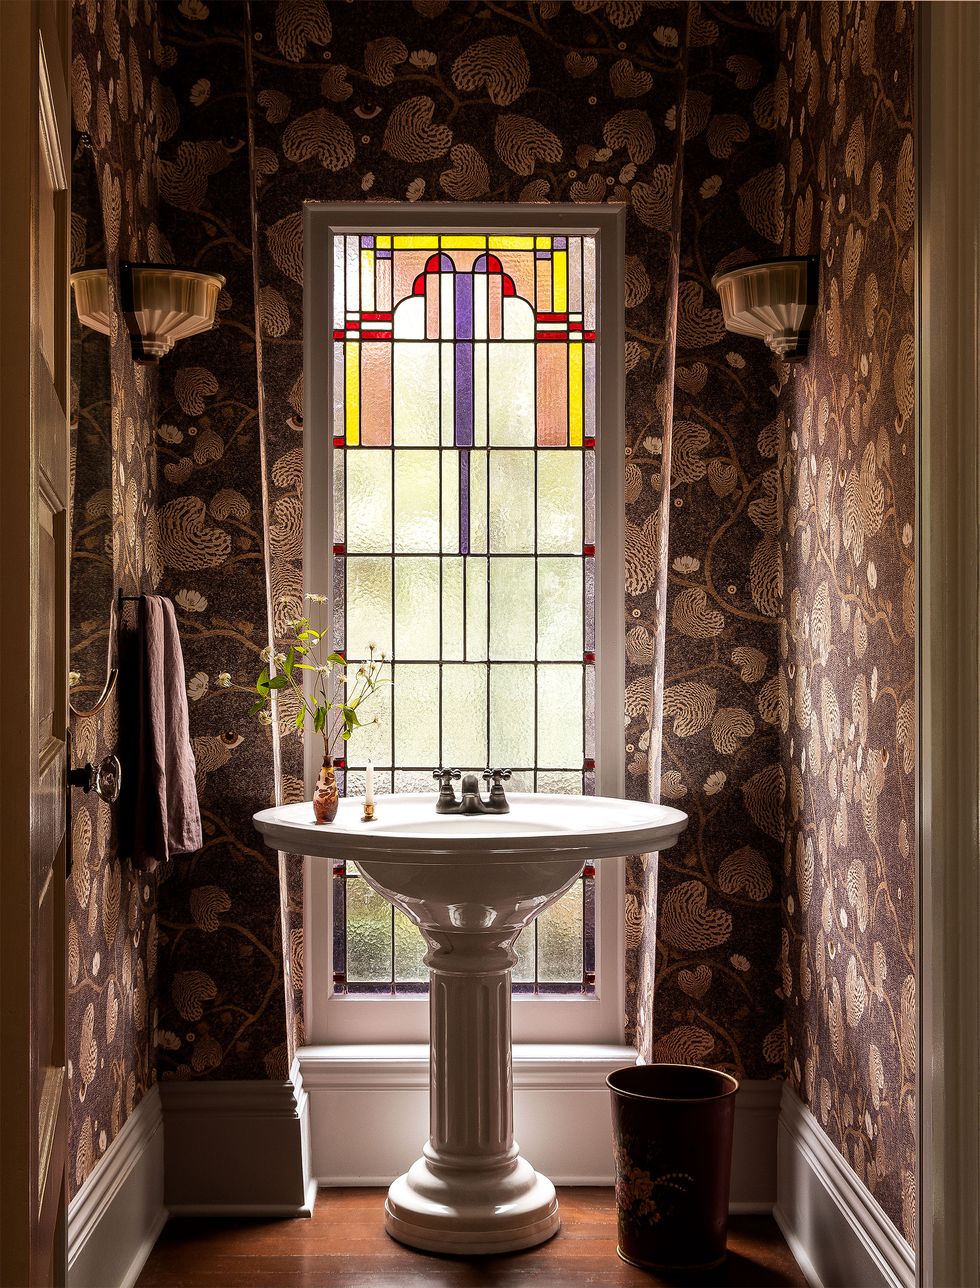 powder room with a brown background leaf pattern wallpaper, vintage sconces, a pedestal sink in front of a tall window with stained glass